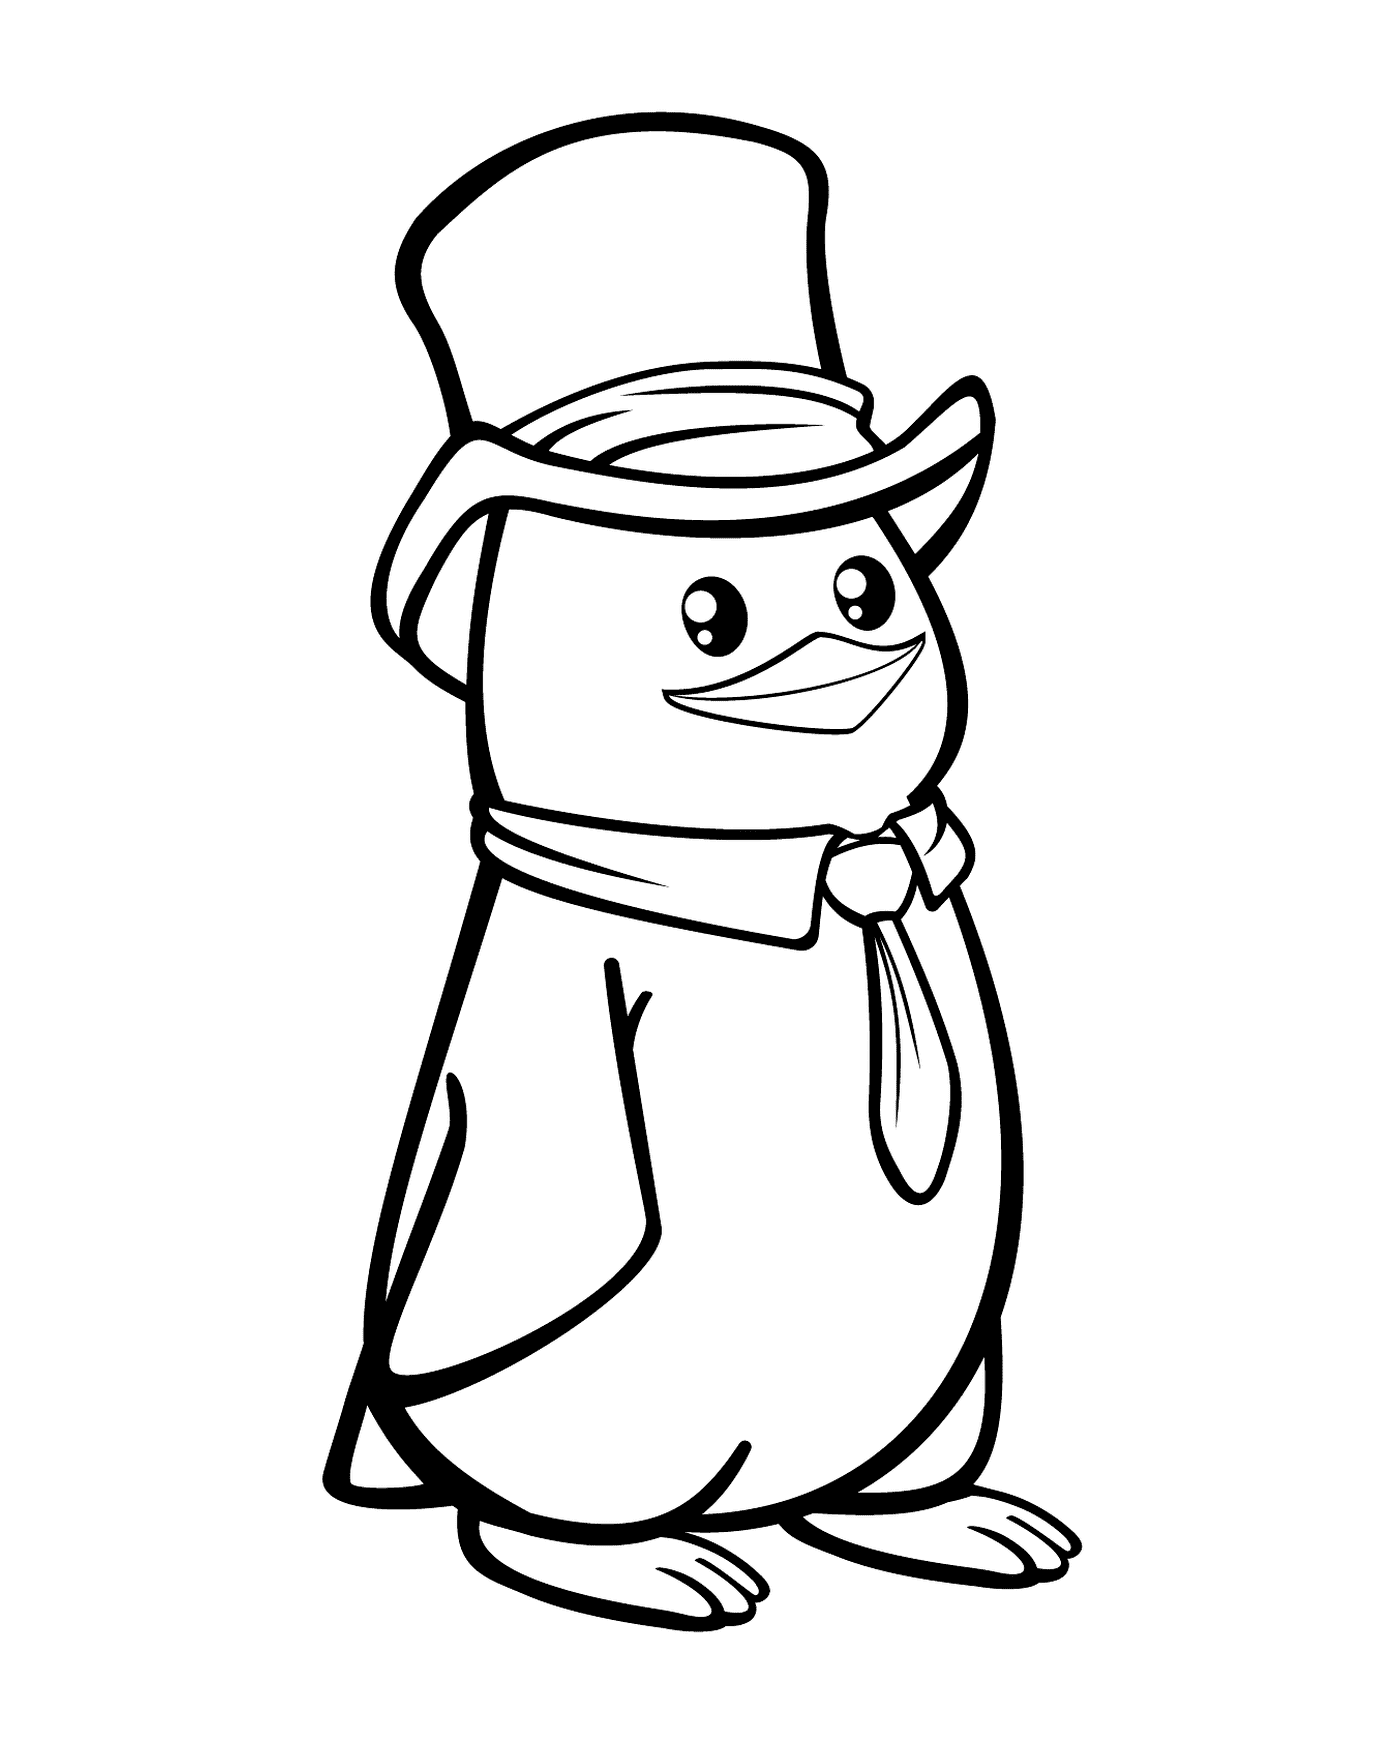  A penguin with a hat and a tie 